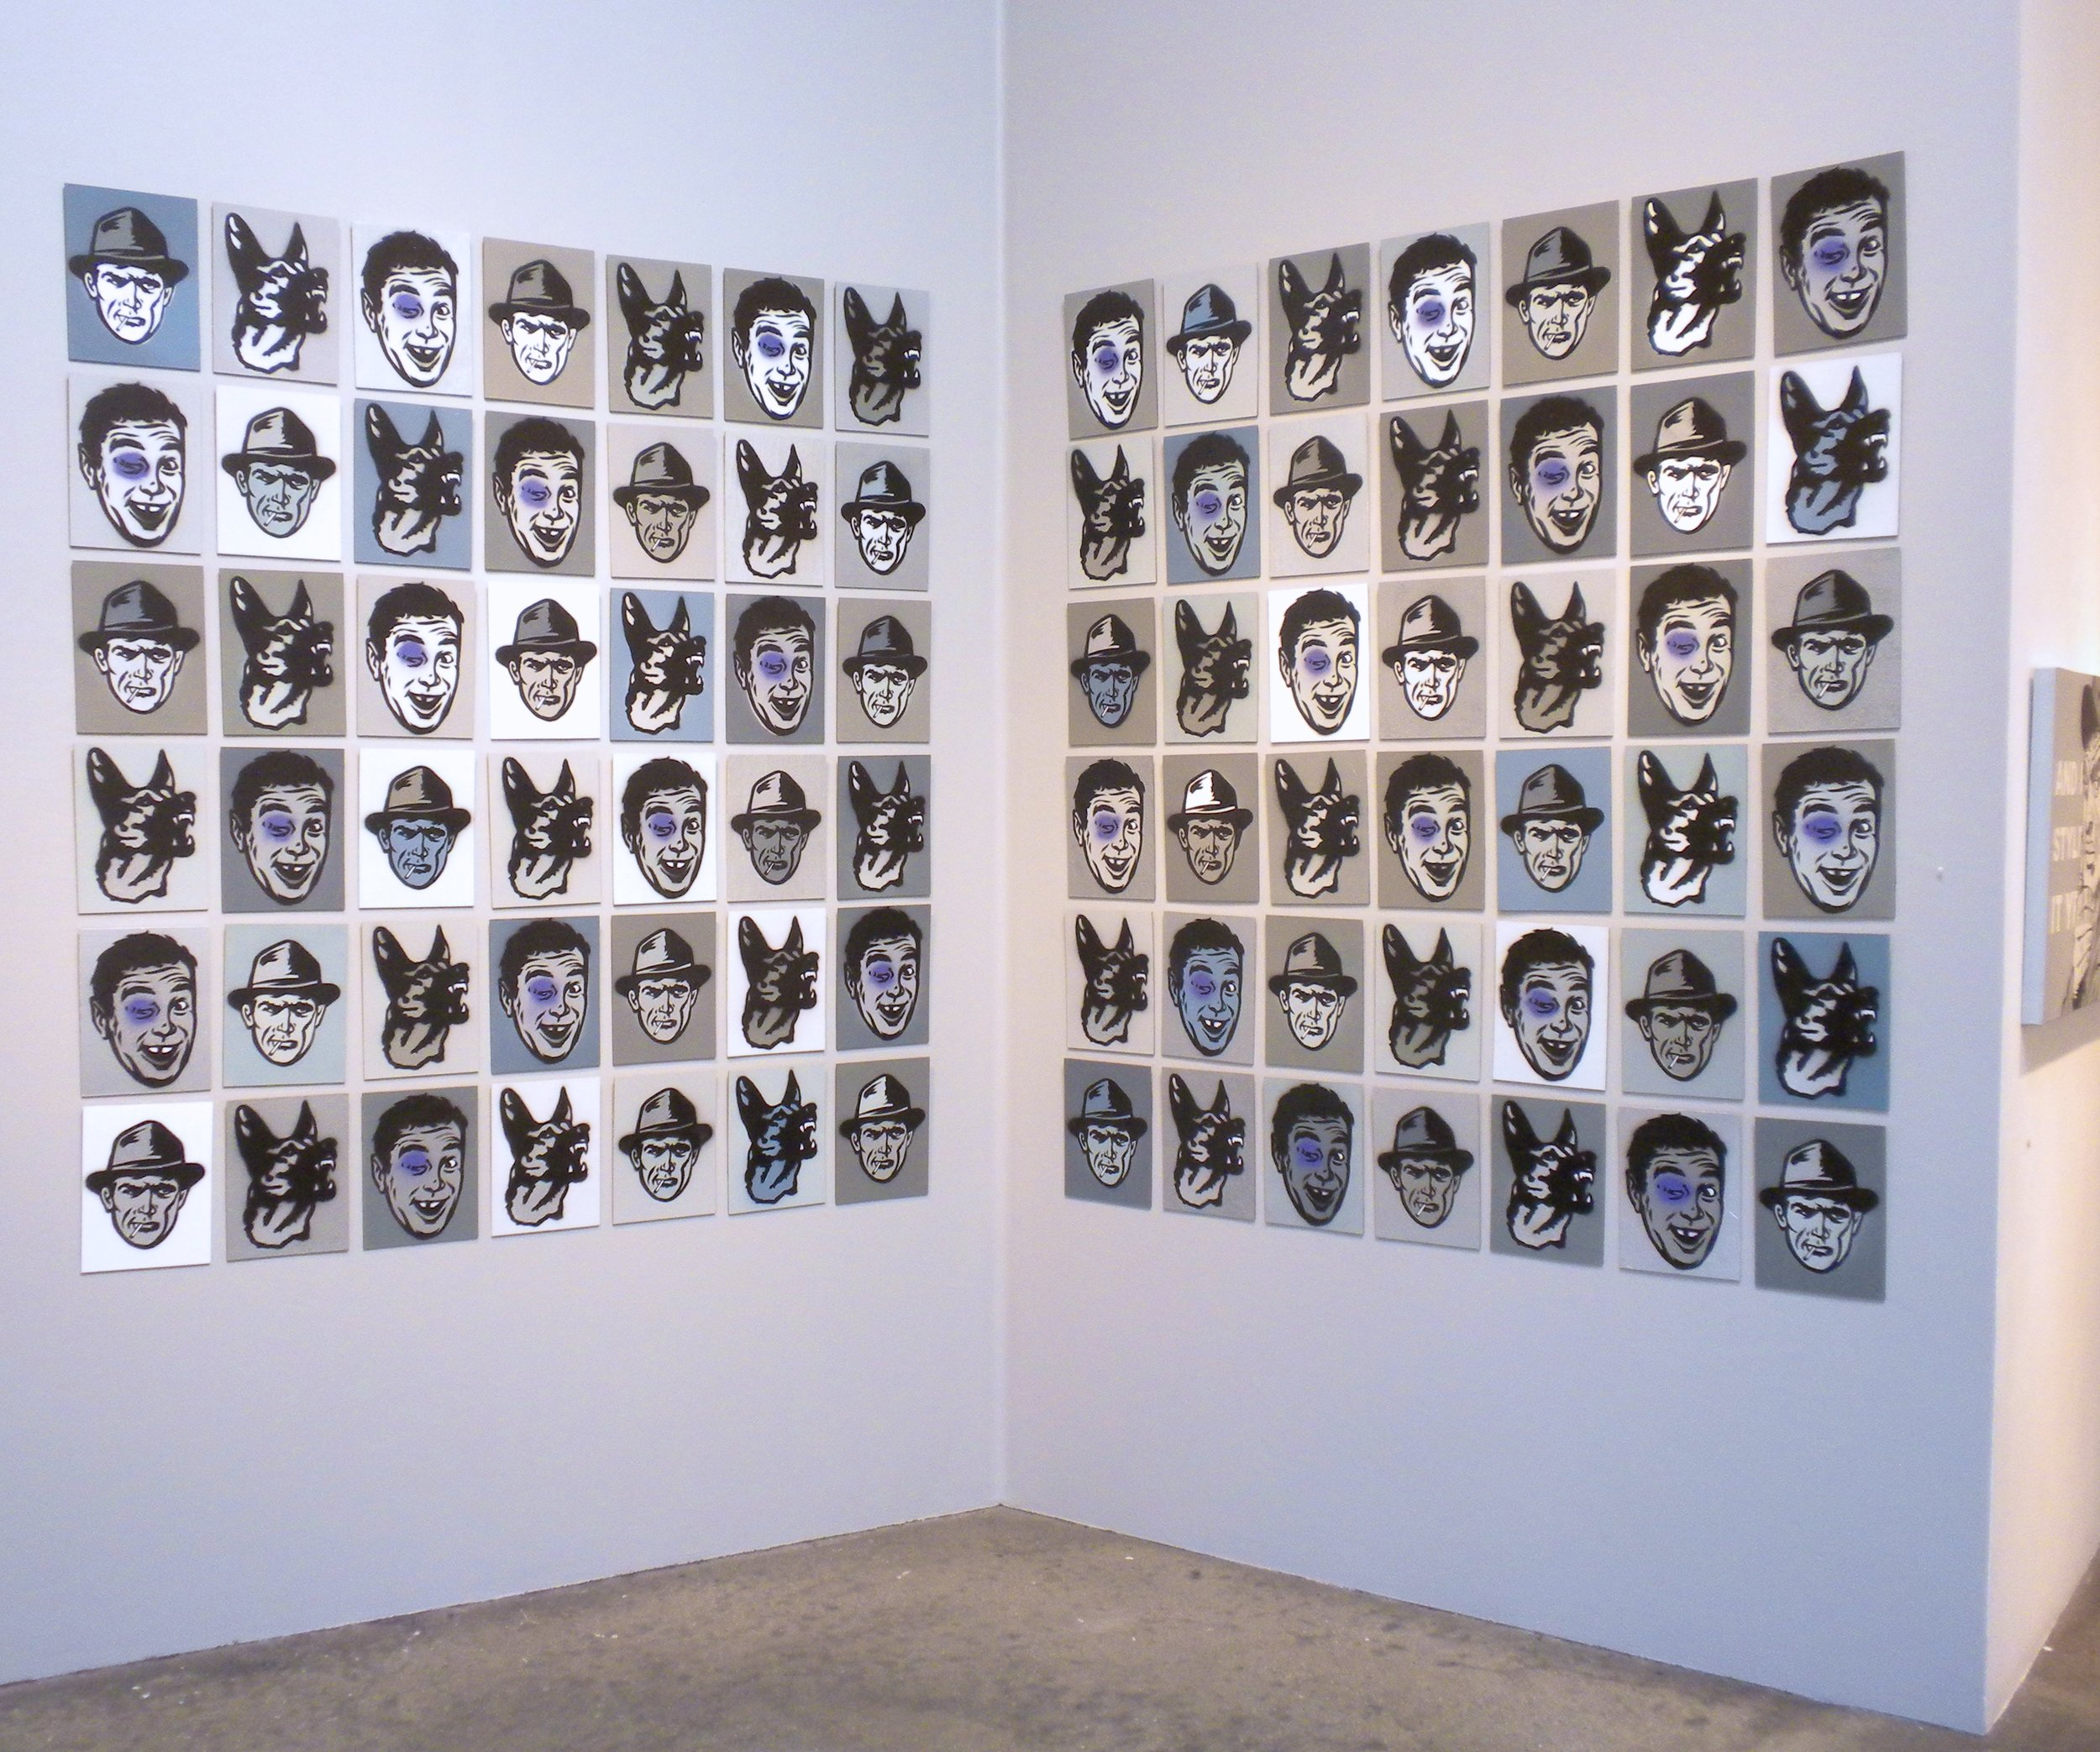 Small stencil series/gallery installation (Some still available for purchase)